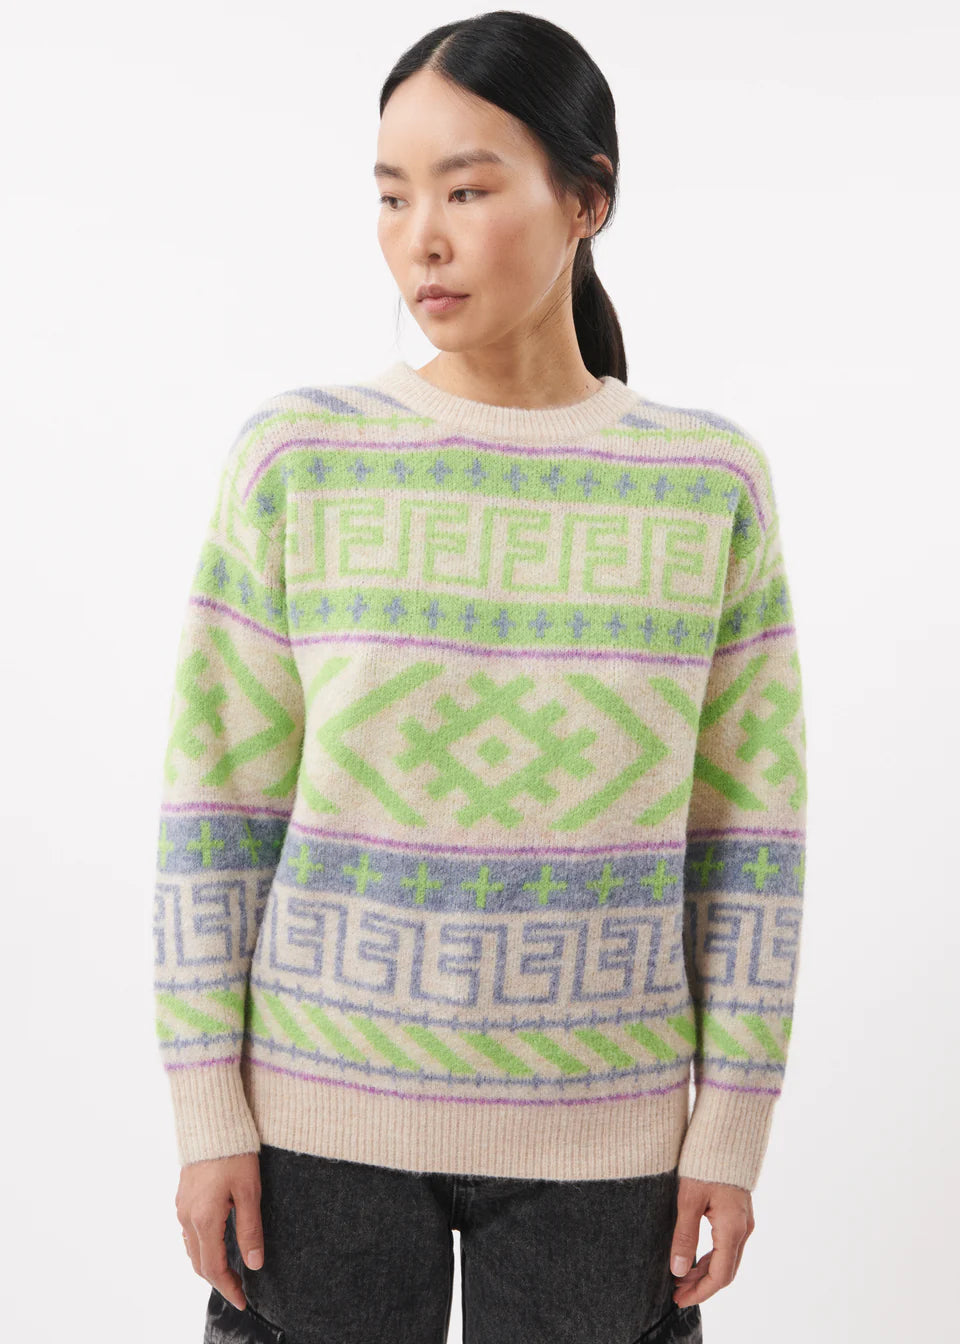 FRNCH Citore Patterned Knit In Aztec Green